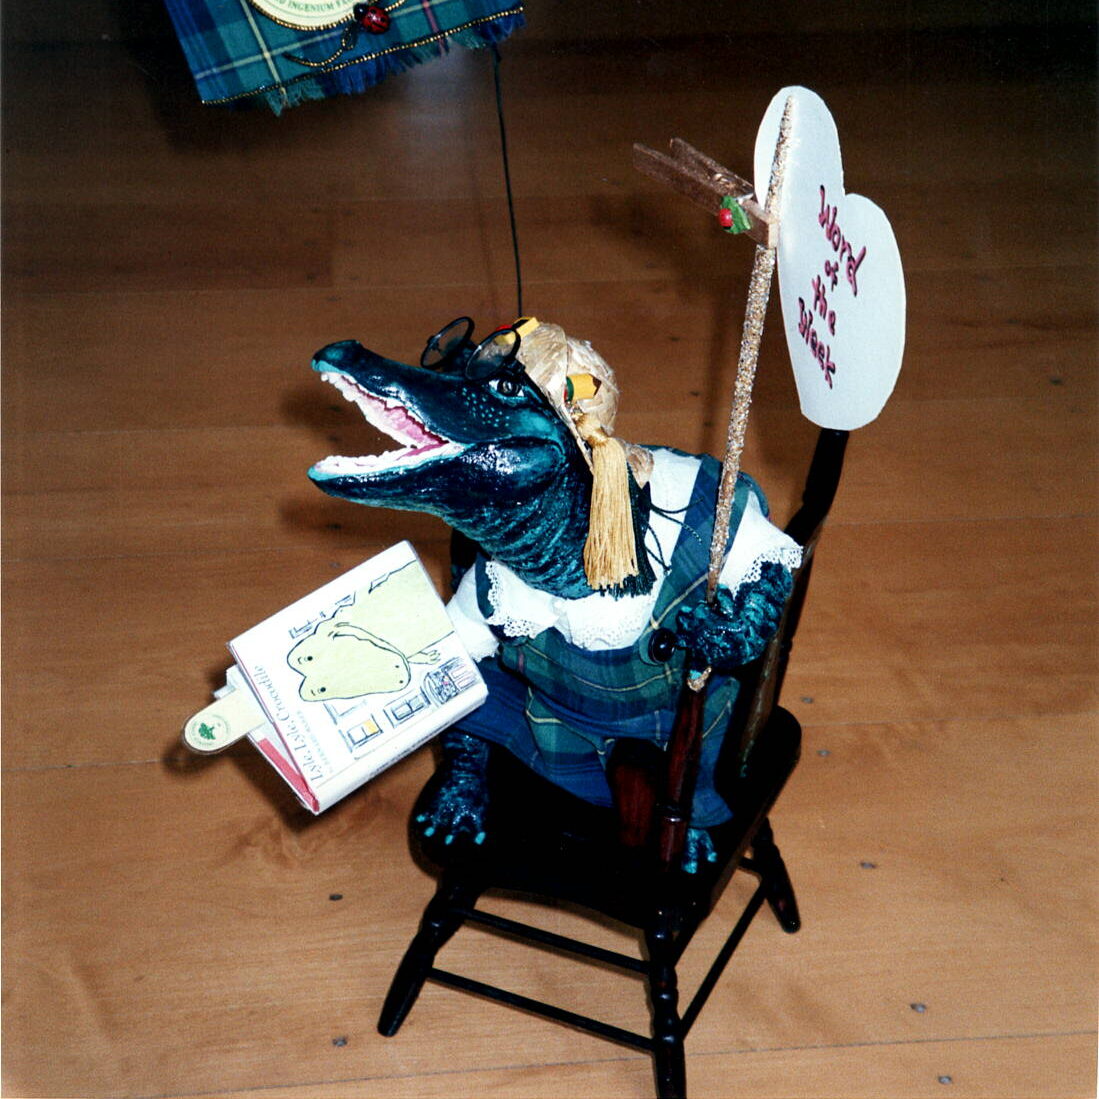 Ali the alligator sitting on a chair holding "Word of the Week" sign.